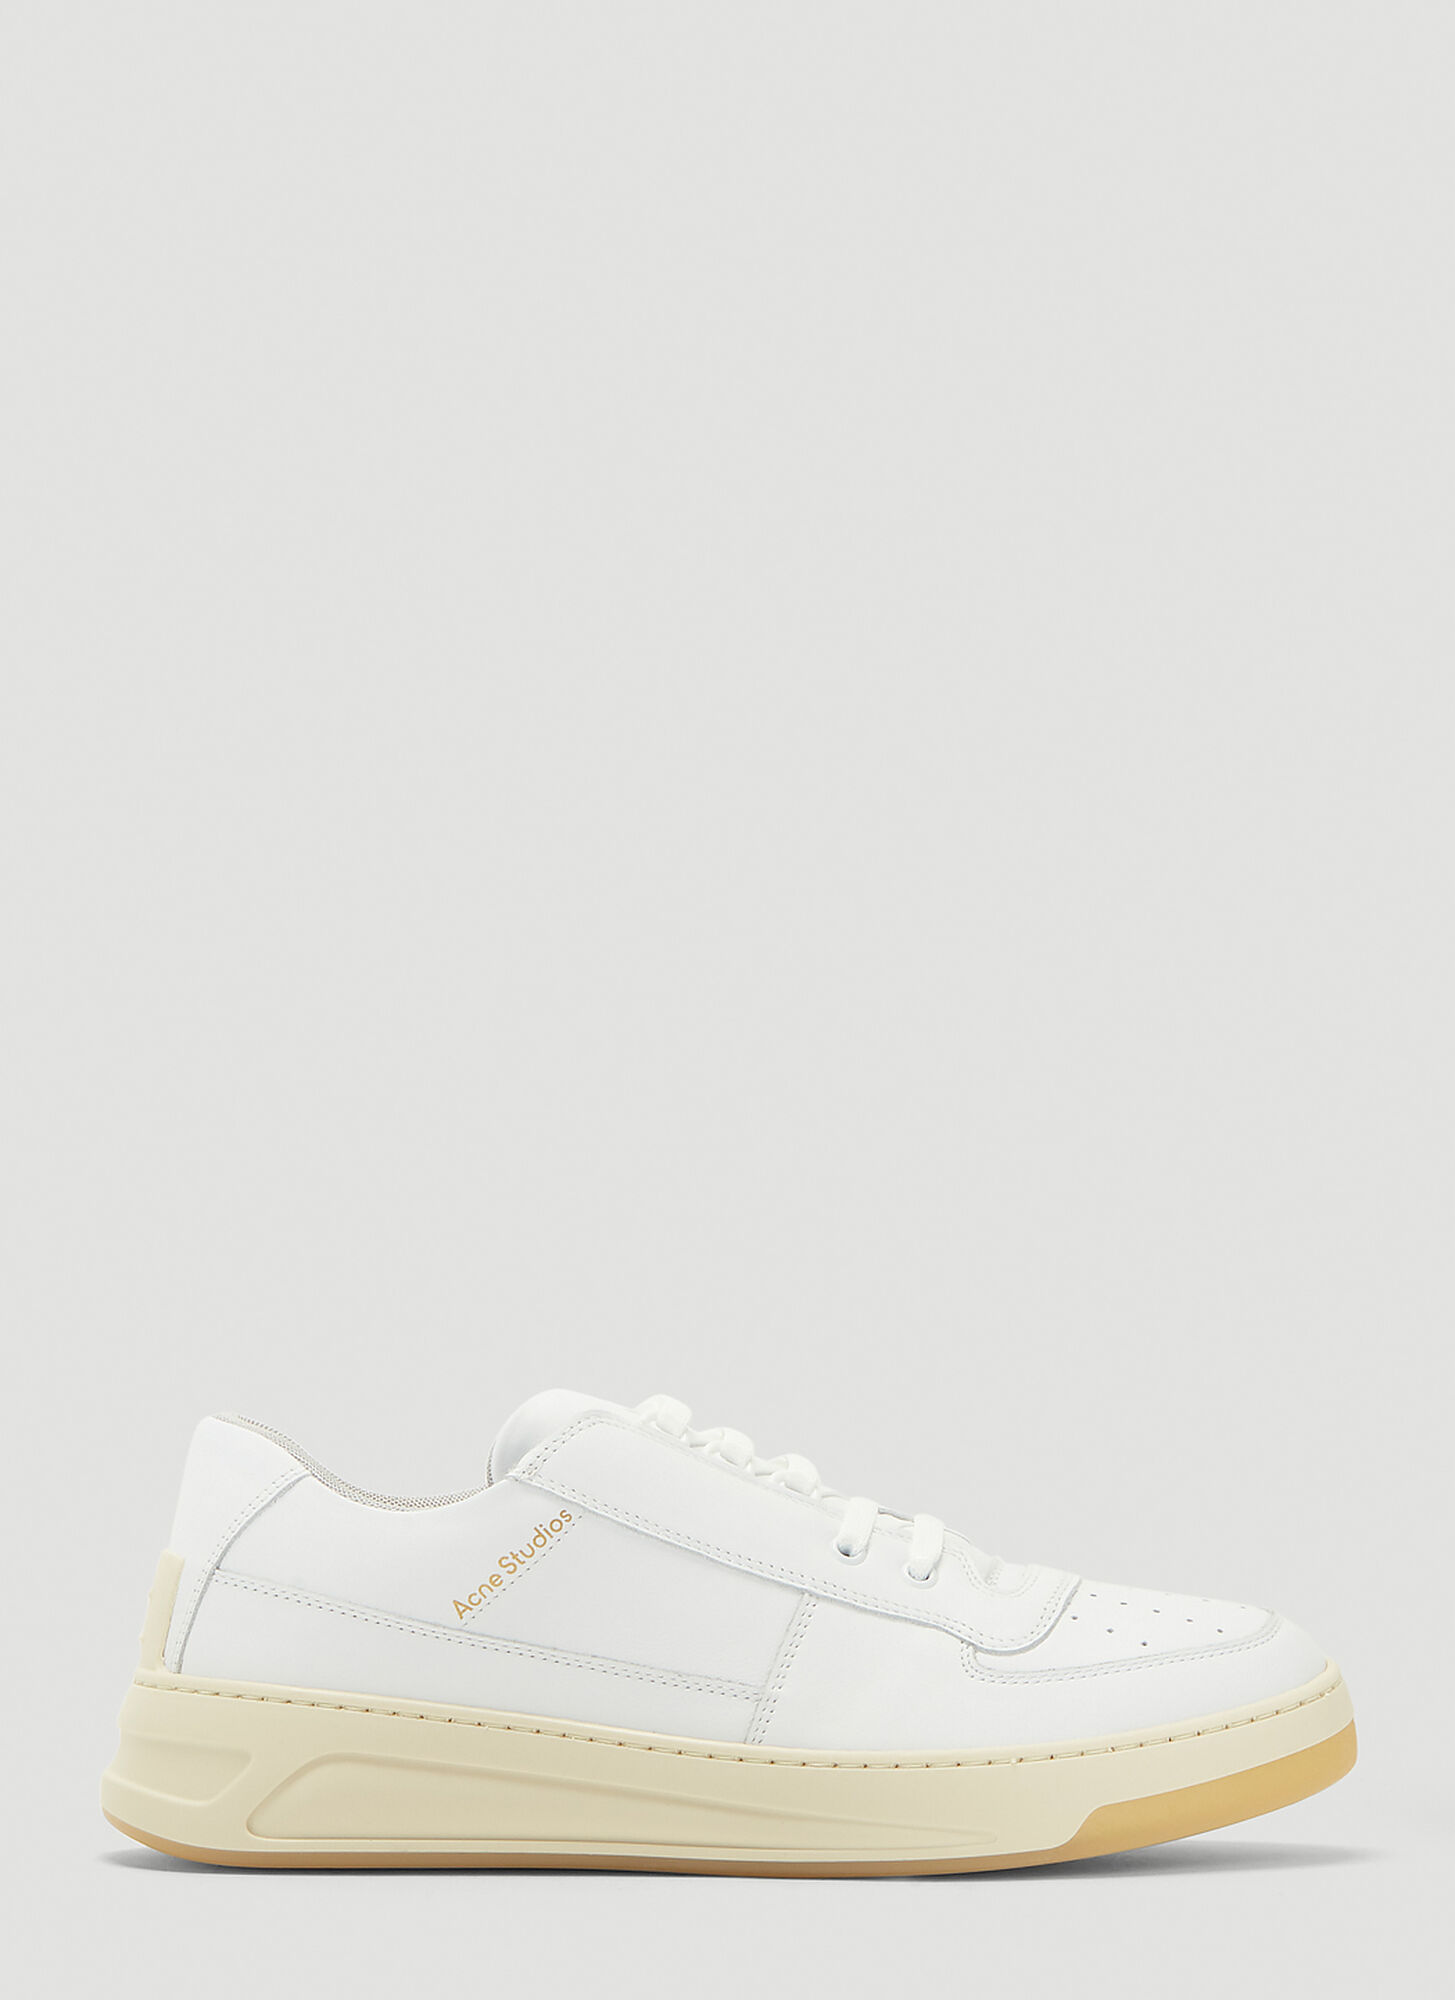 Acne Studios Lace-Up Sneakers in White 